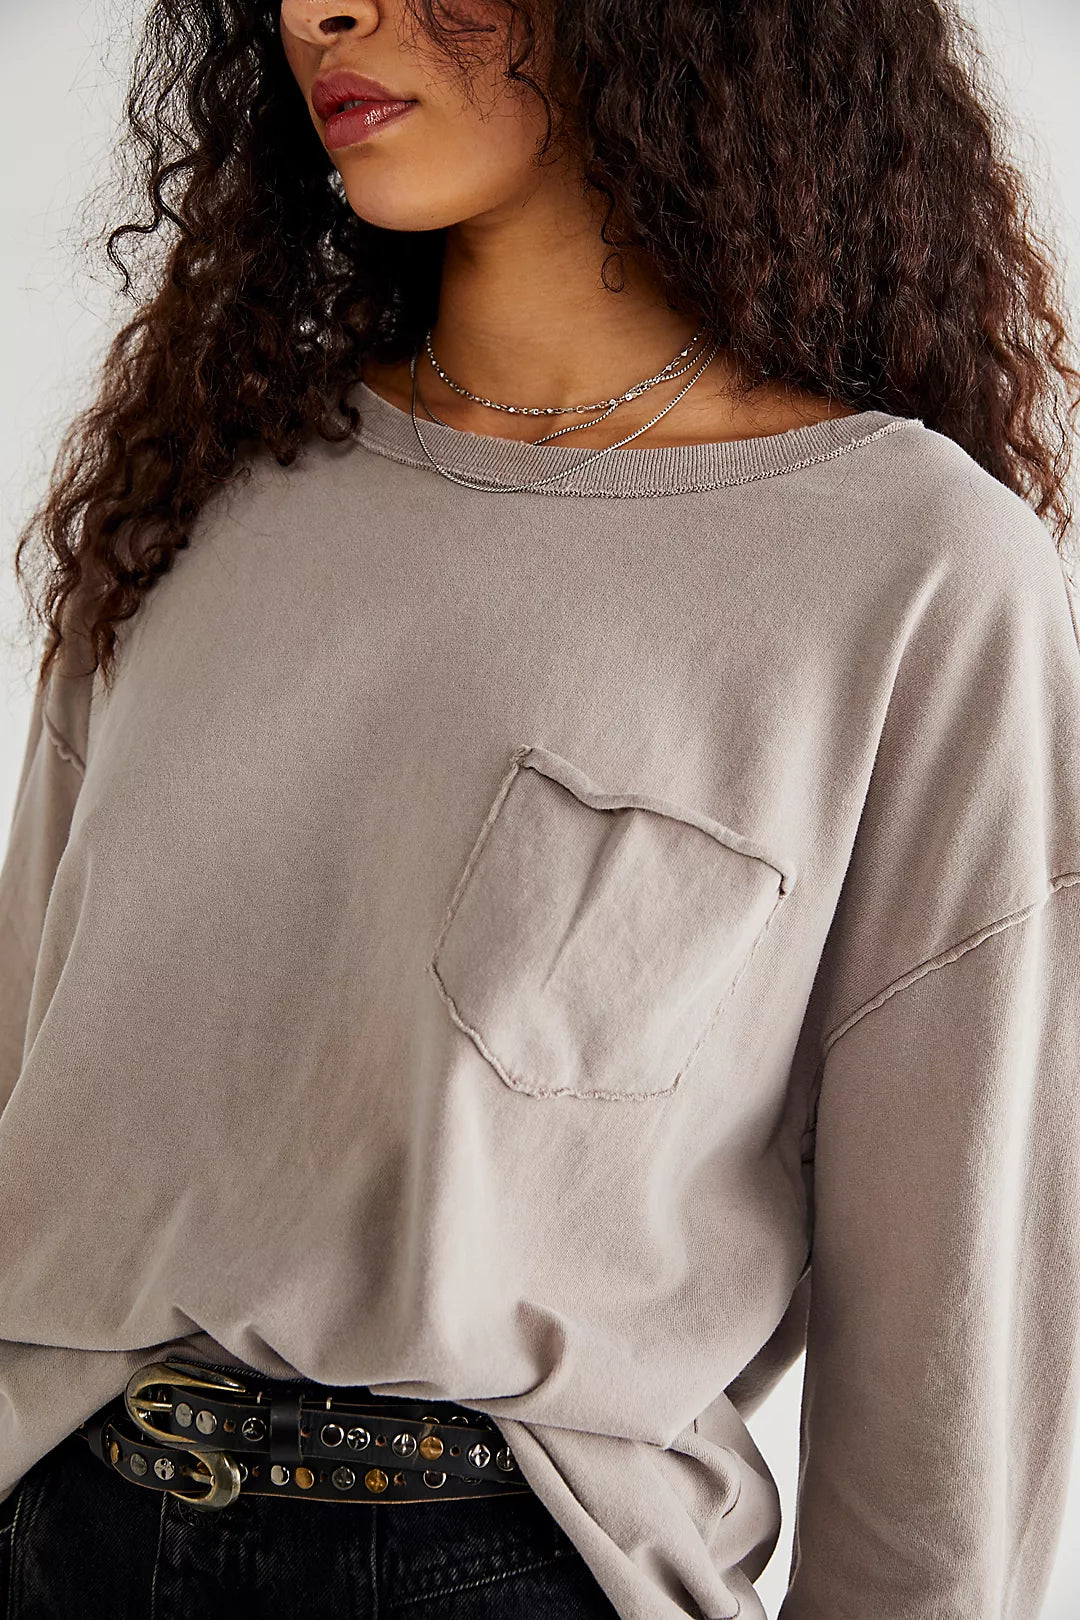 Free People: Fade Into You Top in Etherea